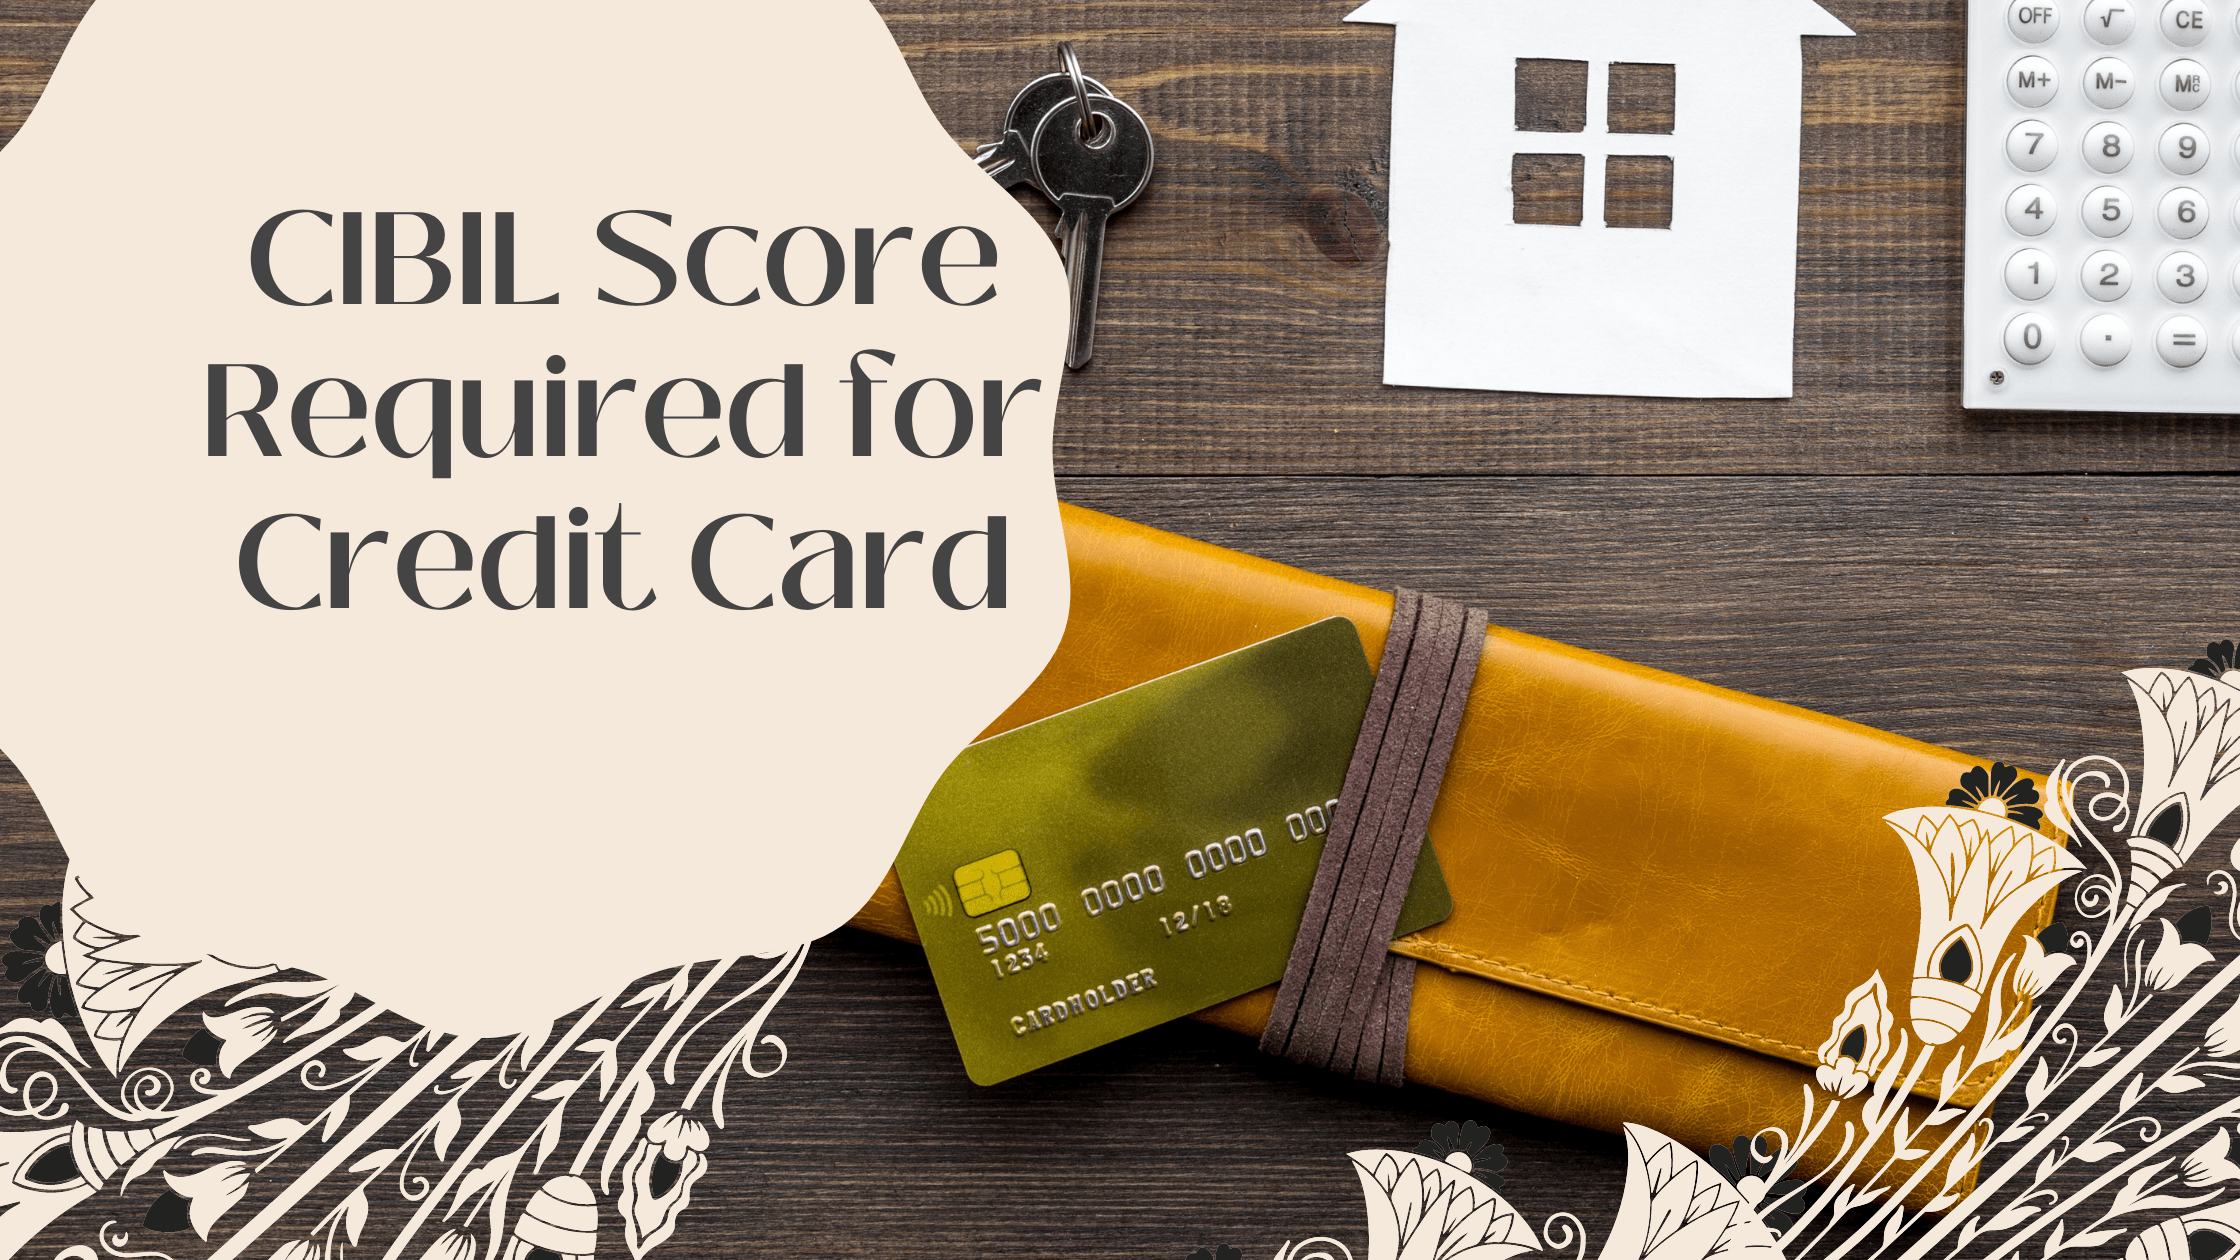 CIBIL Score Required for Credit Card